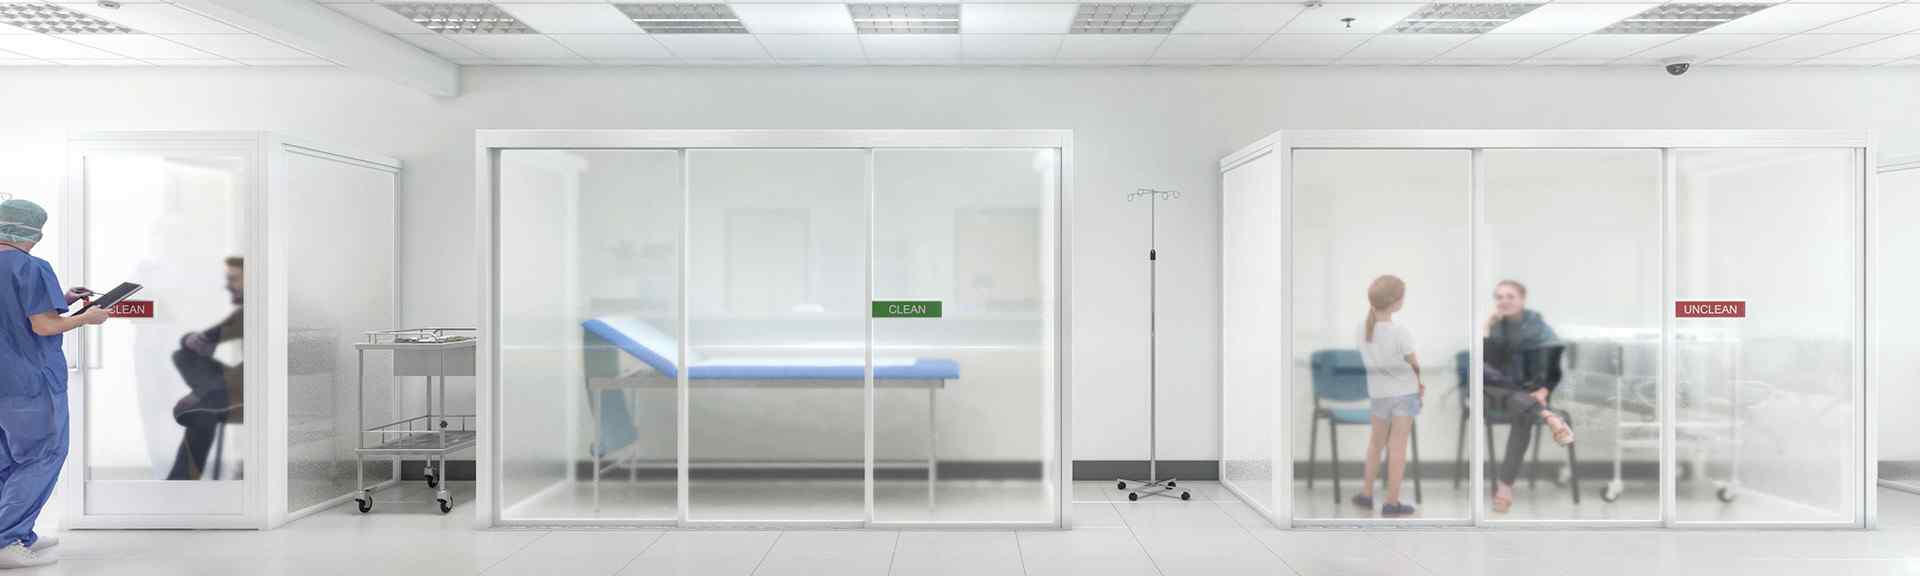 Medical waiting room space dividers